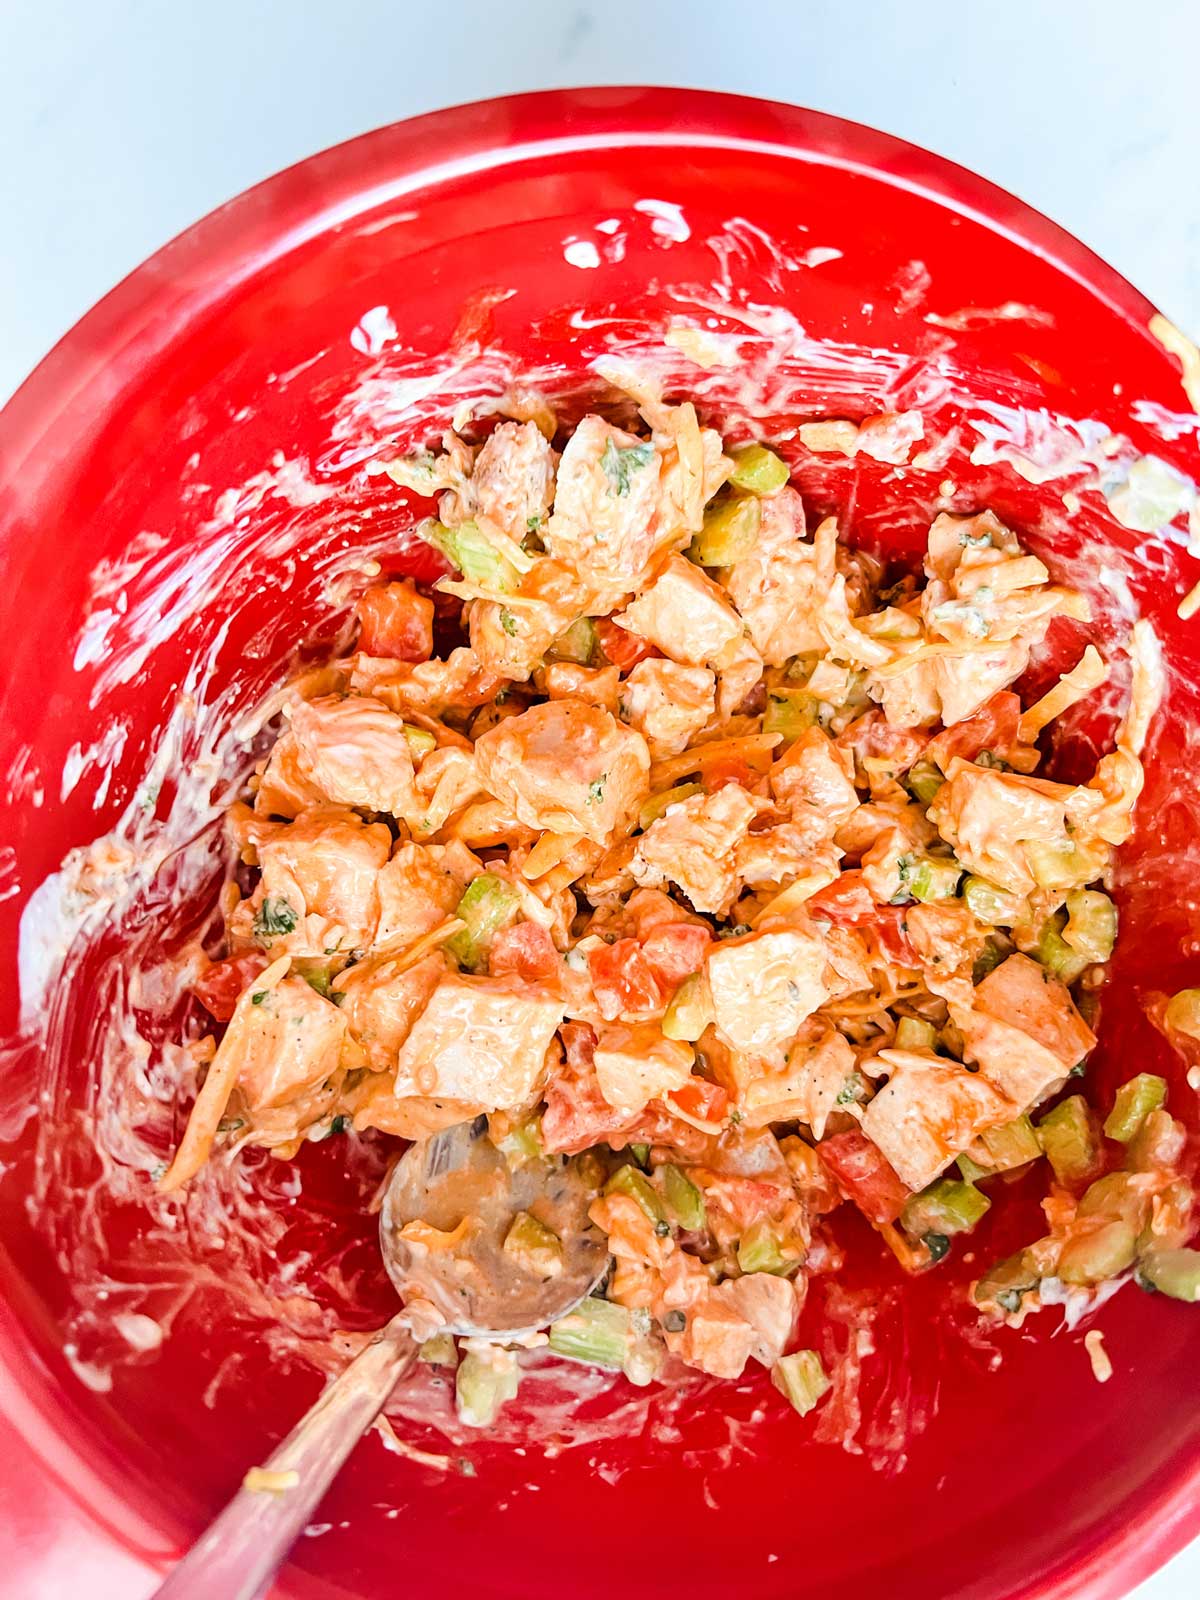 Photo of cubed chicken, celery, tomato, shredded cheddar, hot sauce, and ranch that have been mixed togetherin a red bowl.